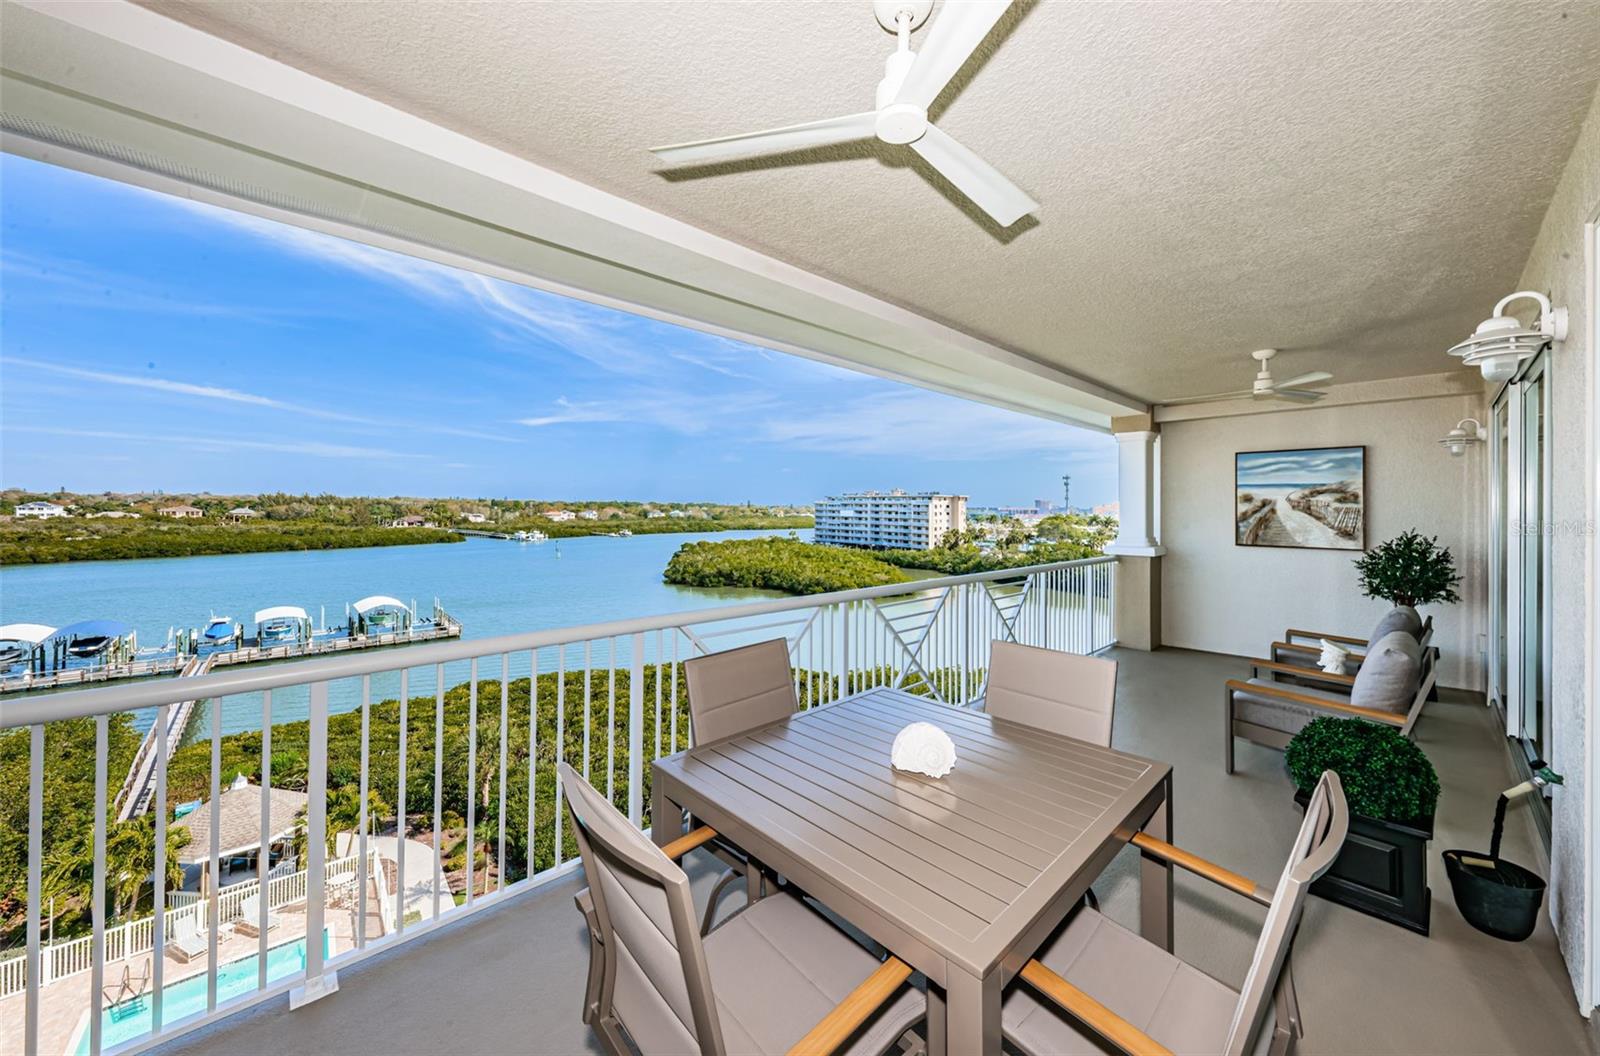 300 Foot Waterfront Balcony with Panoramic Water Views!